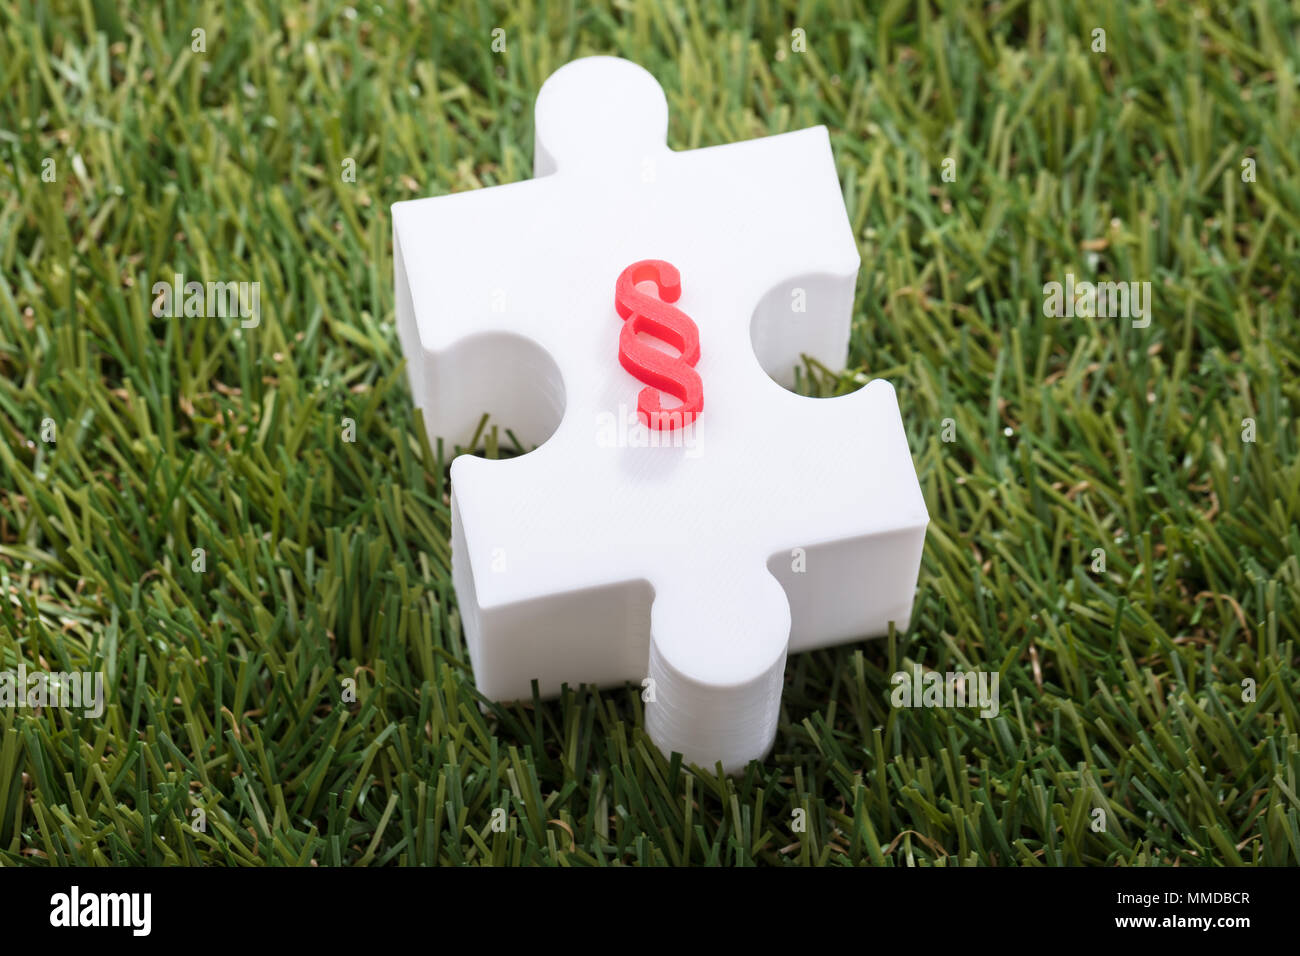 Elevated View Of Red Paragraph Symbol On White Jigsaw Puzzle Over Turf Stock Photo